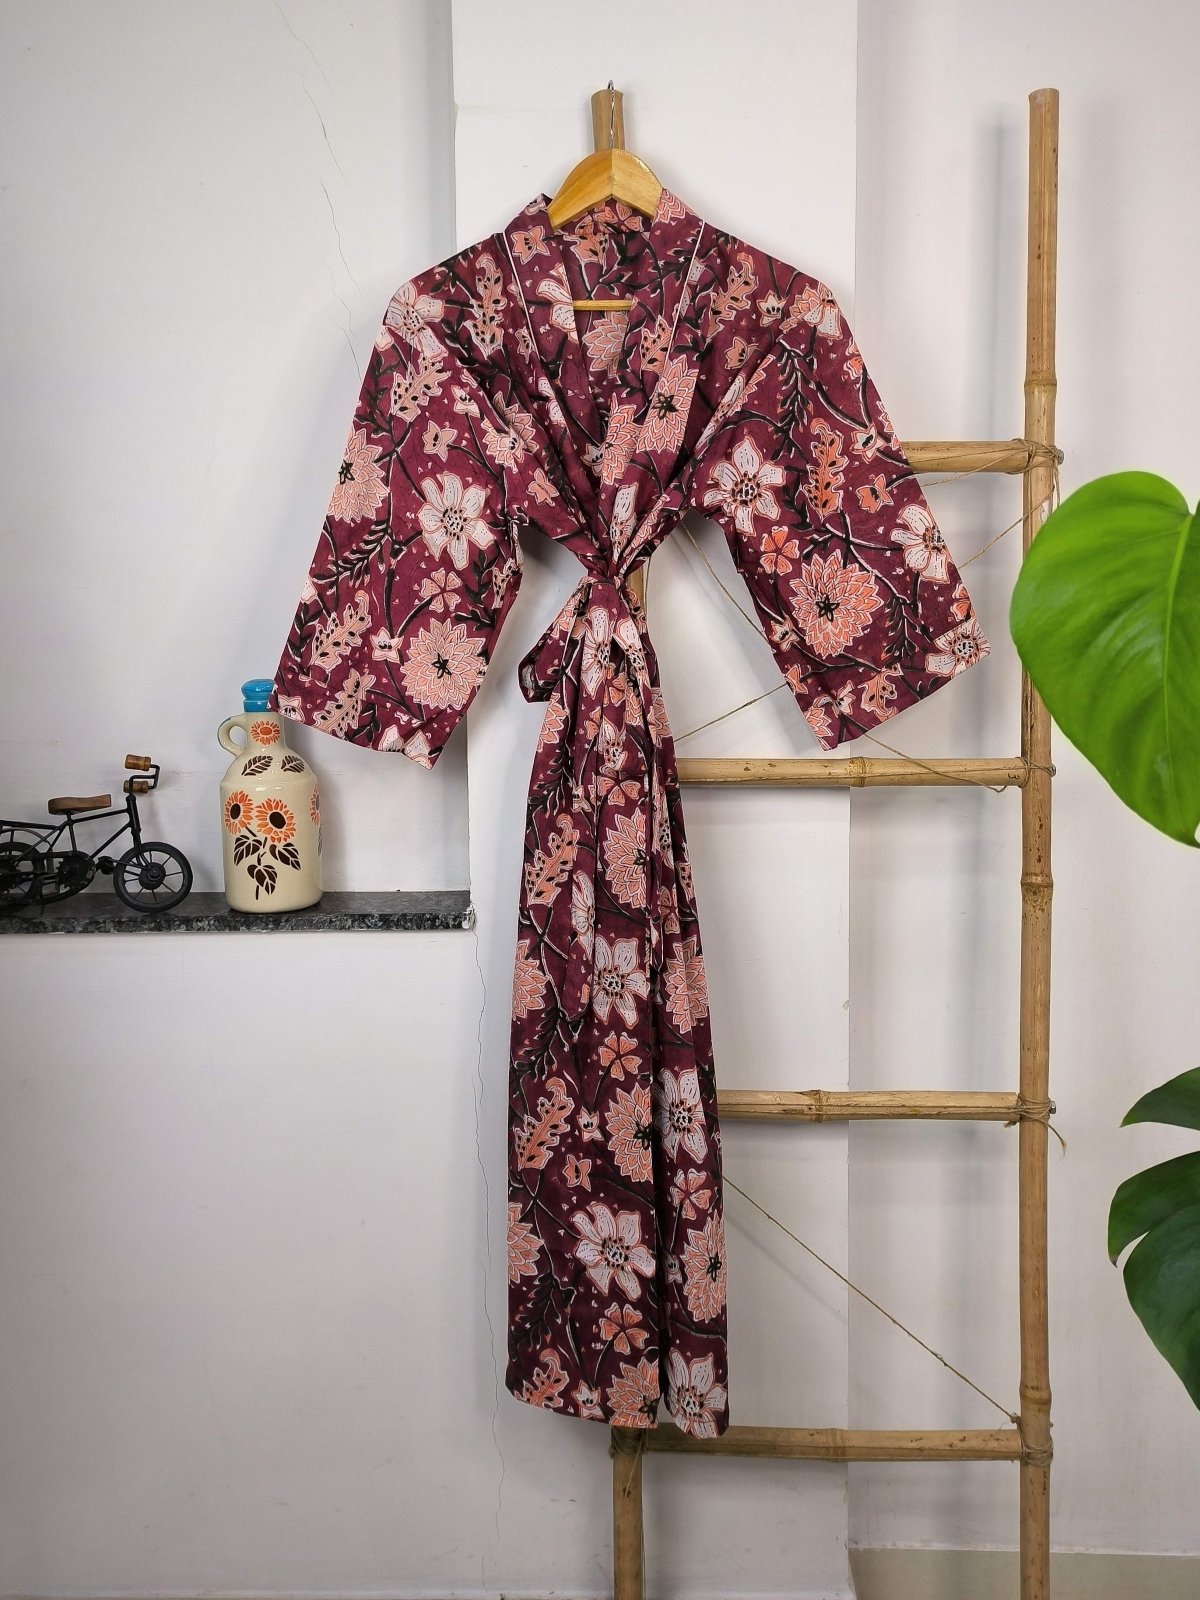 Boho Cotton Kimono House Robe Indian Handprinted Floral Print Pattern | Lightweight Summer Luxury Beach Holidays Yacht Cover Up Stunning Dress - The Eastern Loom